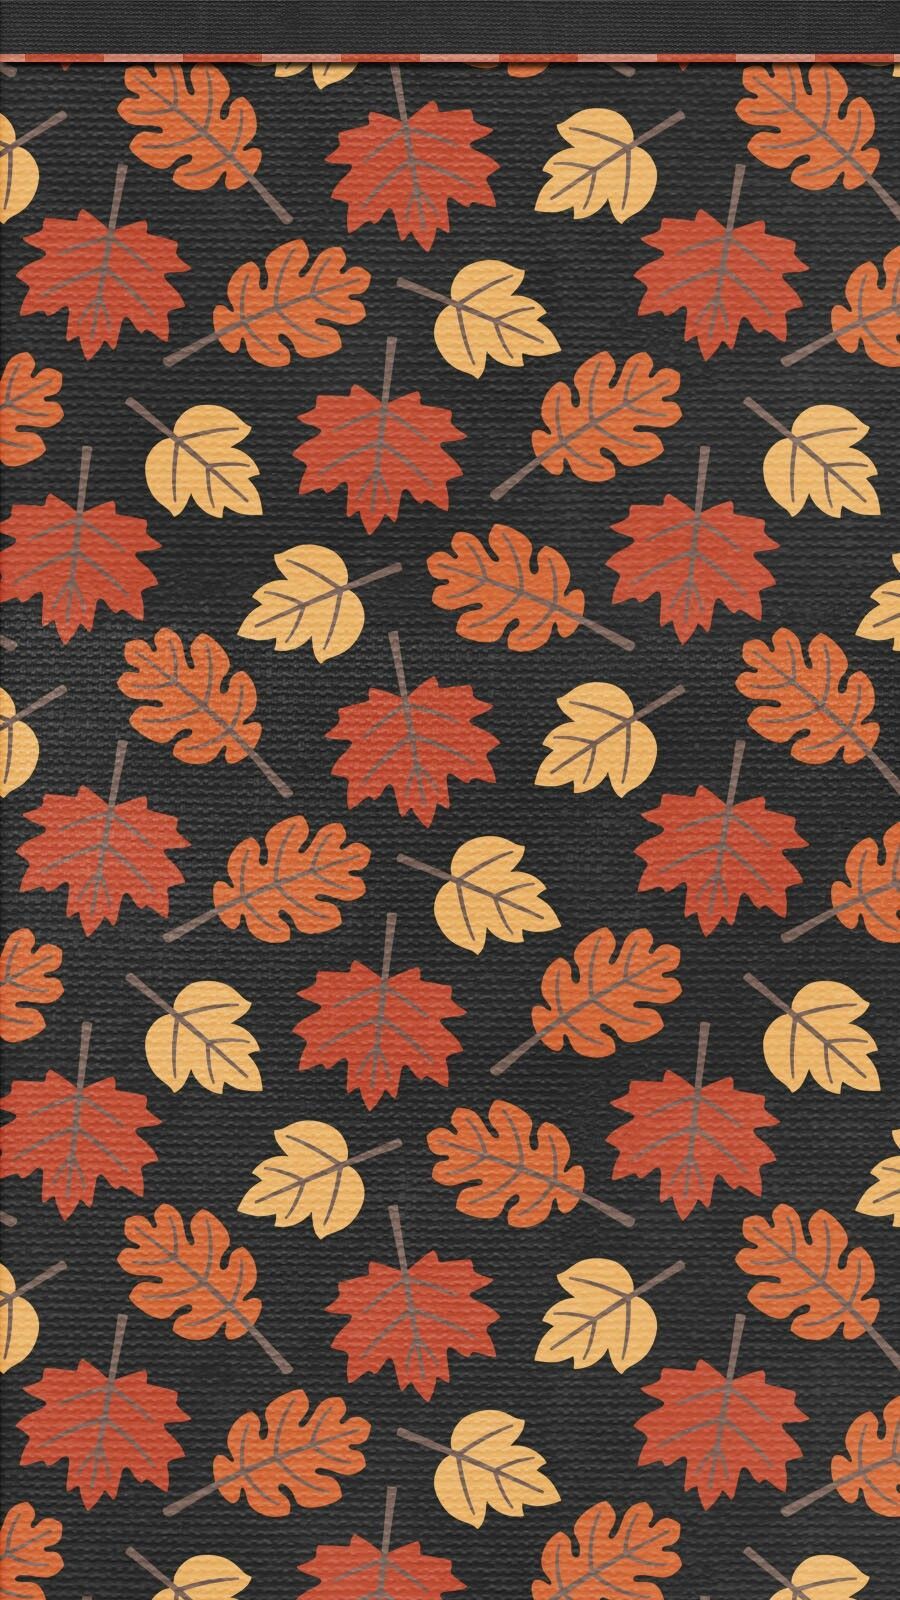 autumn #wallpaper #iphone #android #theme #cute. Fall wallpaper, iPhone wallpaper fall, Autumn leaves wallpaper